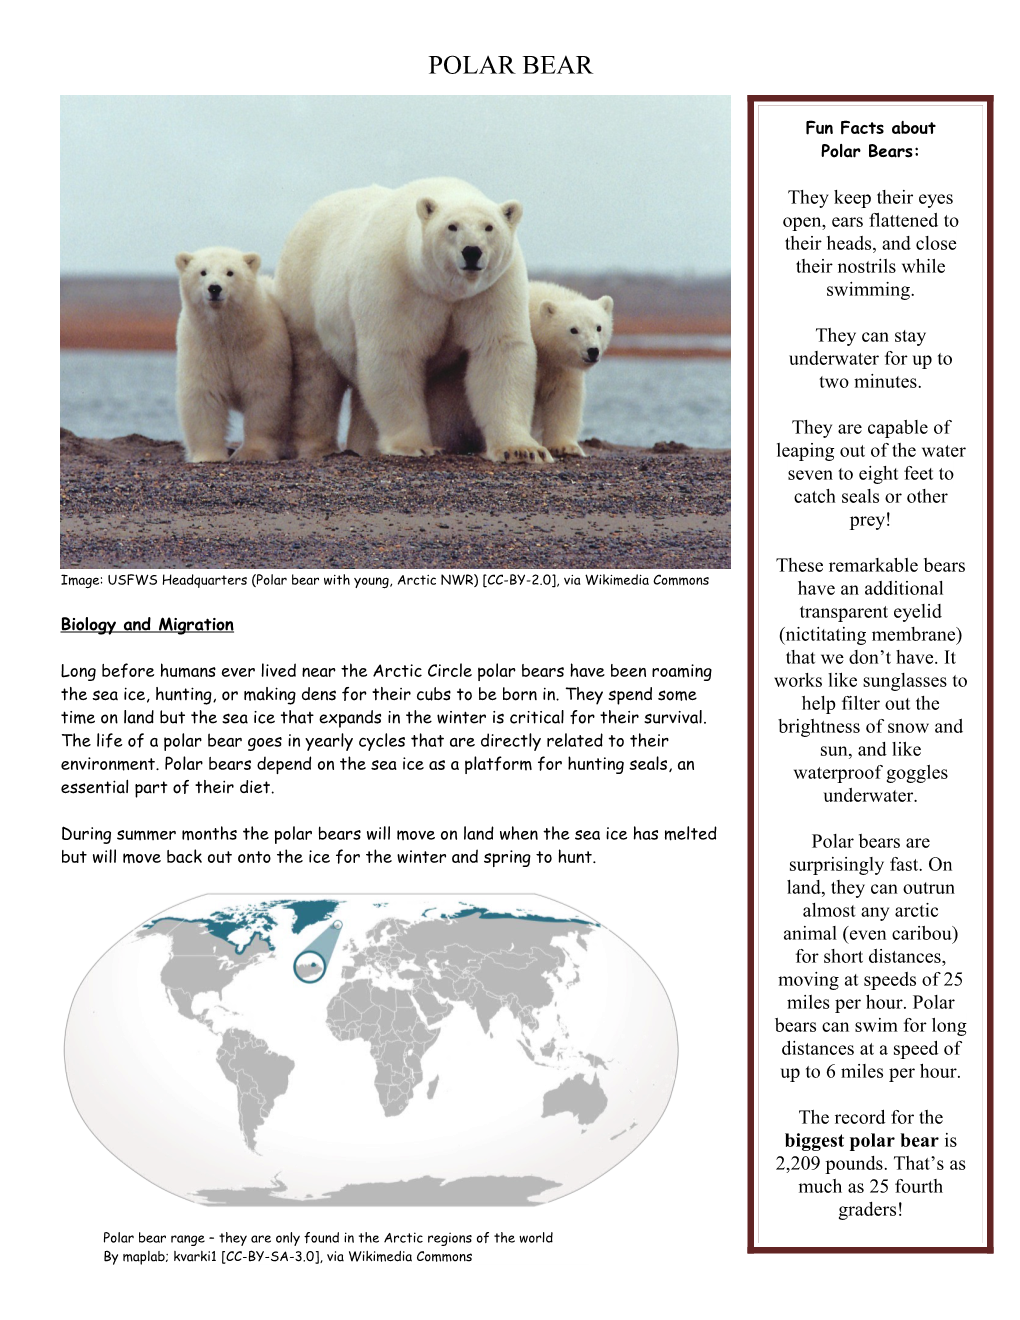 Image: USFWS Headquarters (Polar Bear with Young, Arctic NWR) CC-BY-2.0 , Via Wikimedia Commons